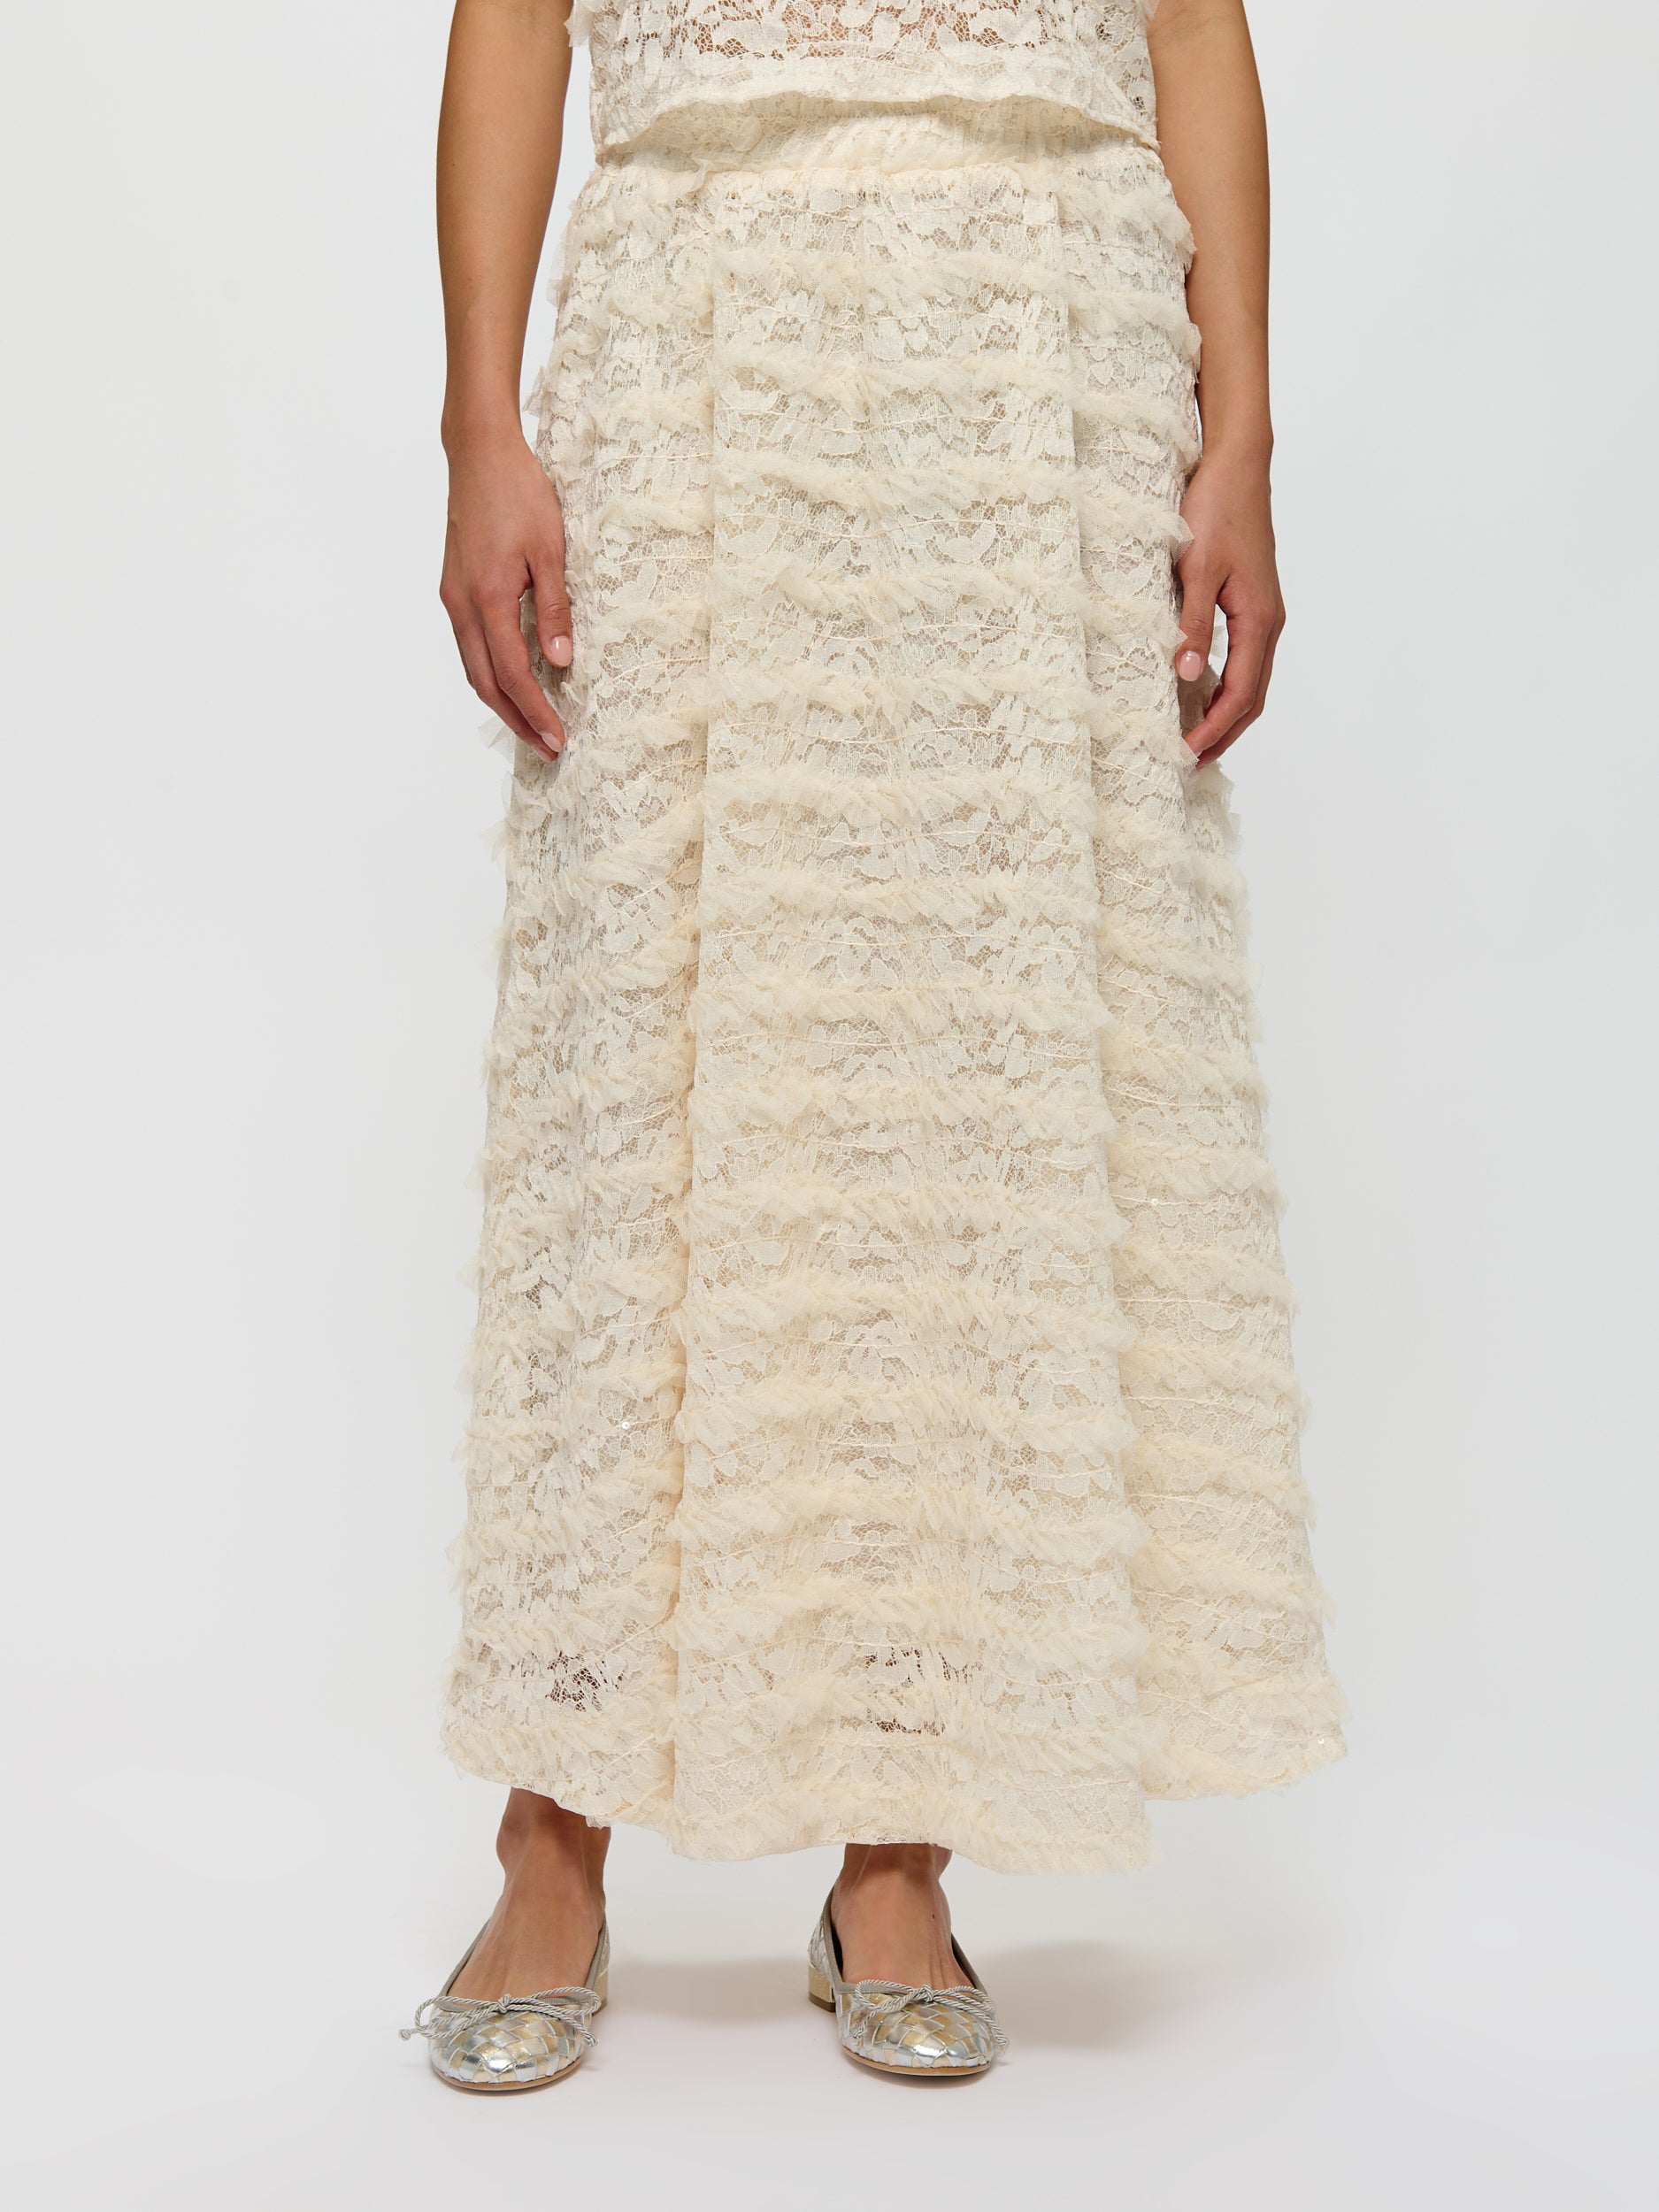 Lace Maxi Skirt